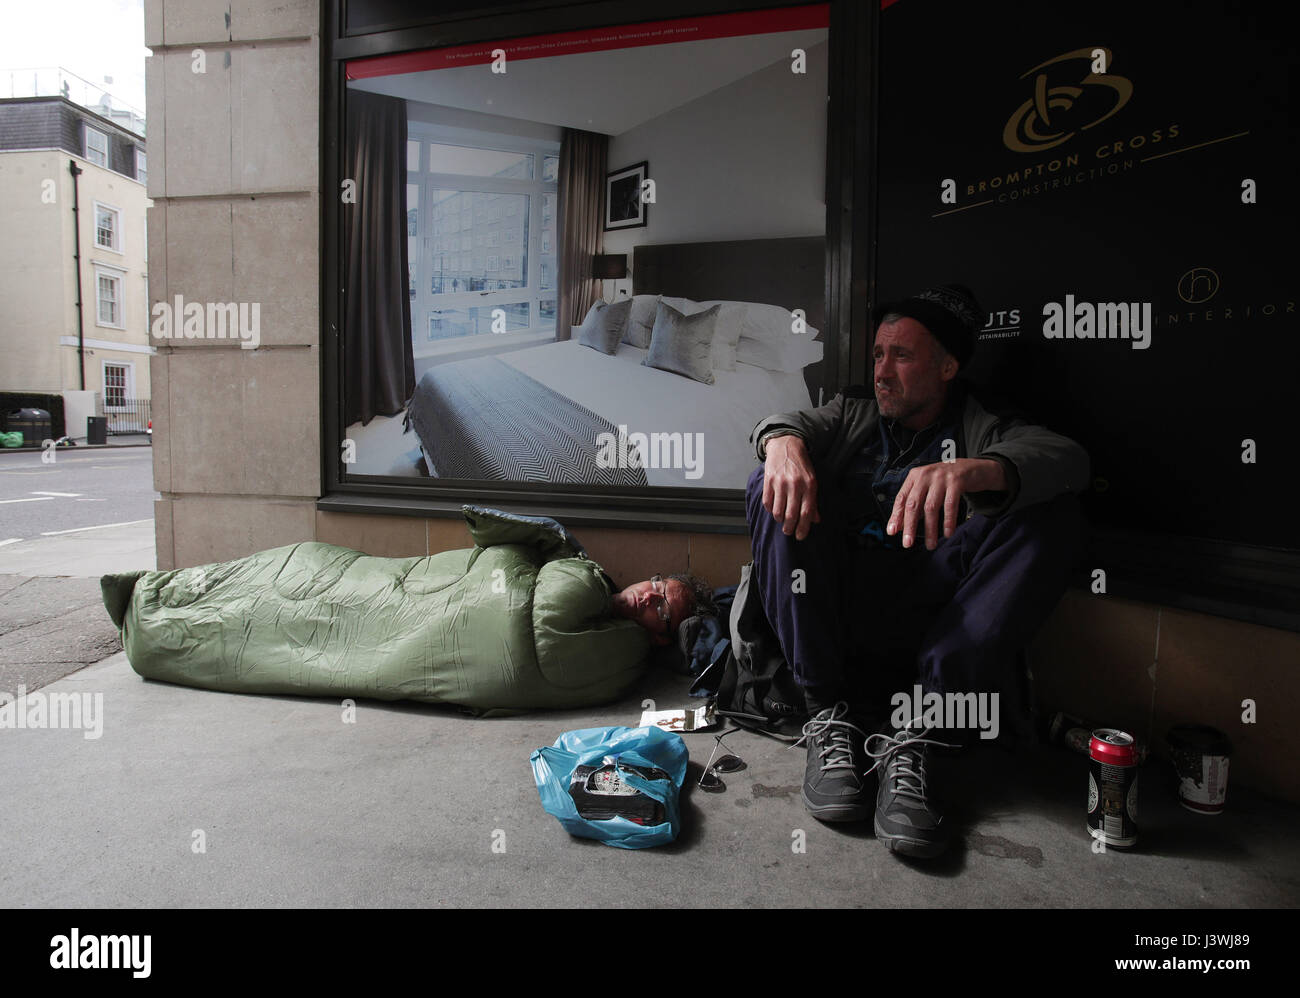 John and Chris sleeping rough next to a display advertising luxury apartments, in Victoria, London. Stock Photo